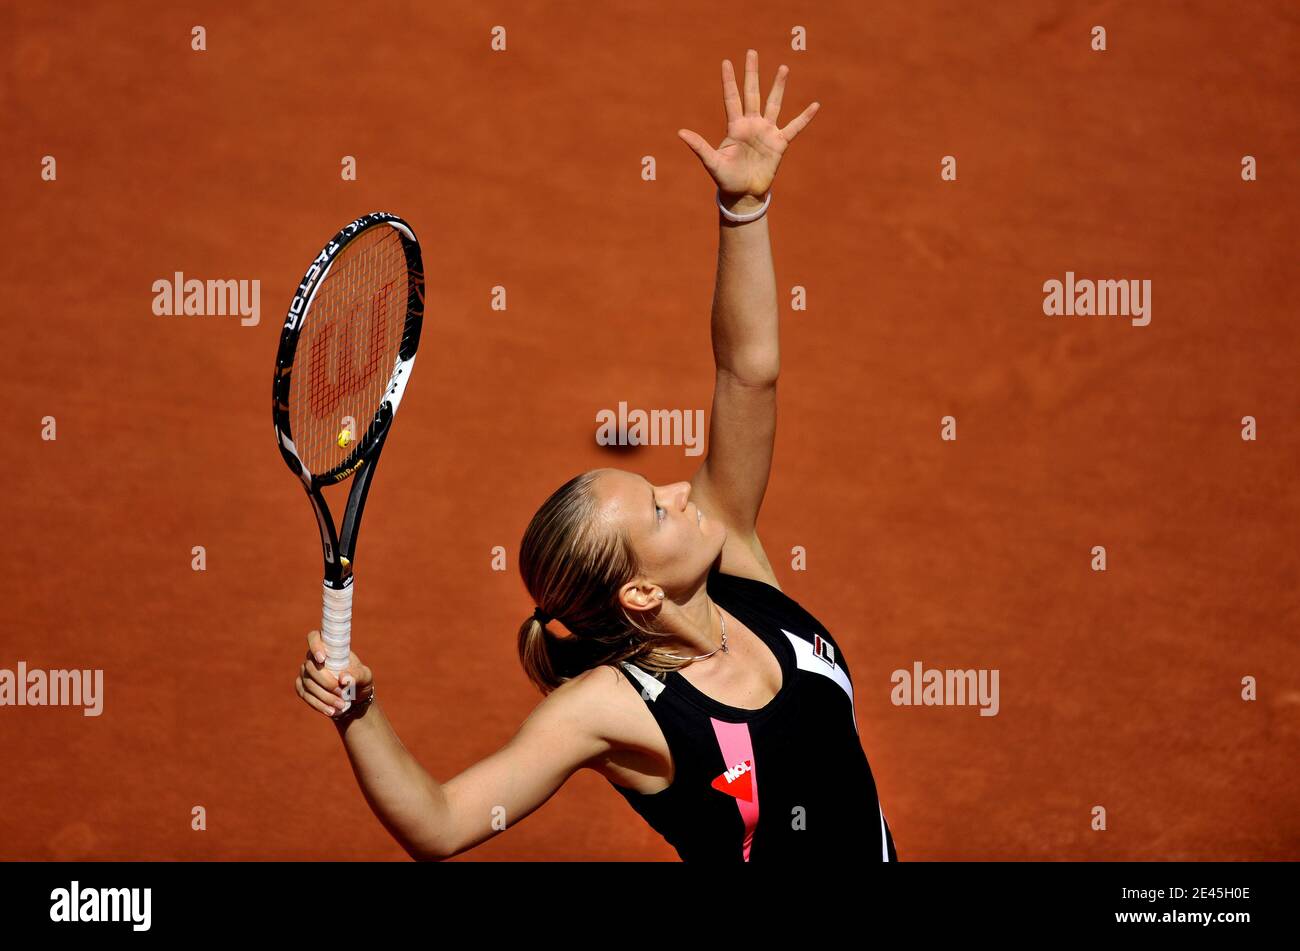 Hungaria's Agnes Szavay defeats, 6-0, 6-4, USA's Venus Williams in their third round of the French Open tennis at the Roland Garros stadium in Paris, France on May 29, 2009. Photo by Christophe Guibbaud/Cameleon/ABACAPRESS.COM Stock Photo